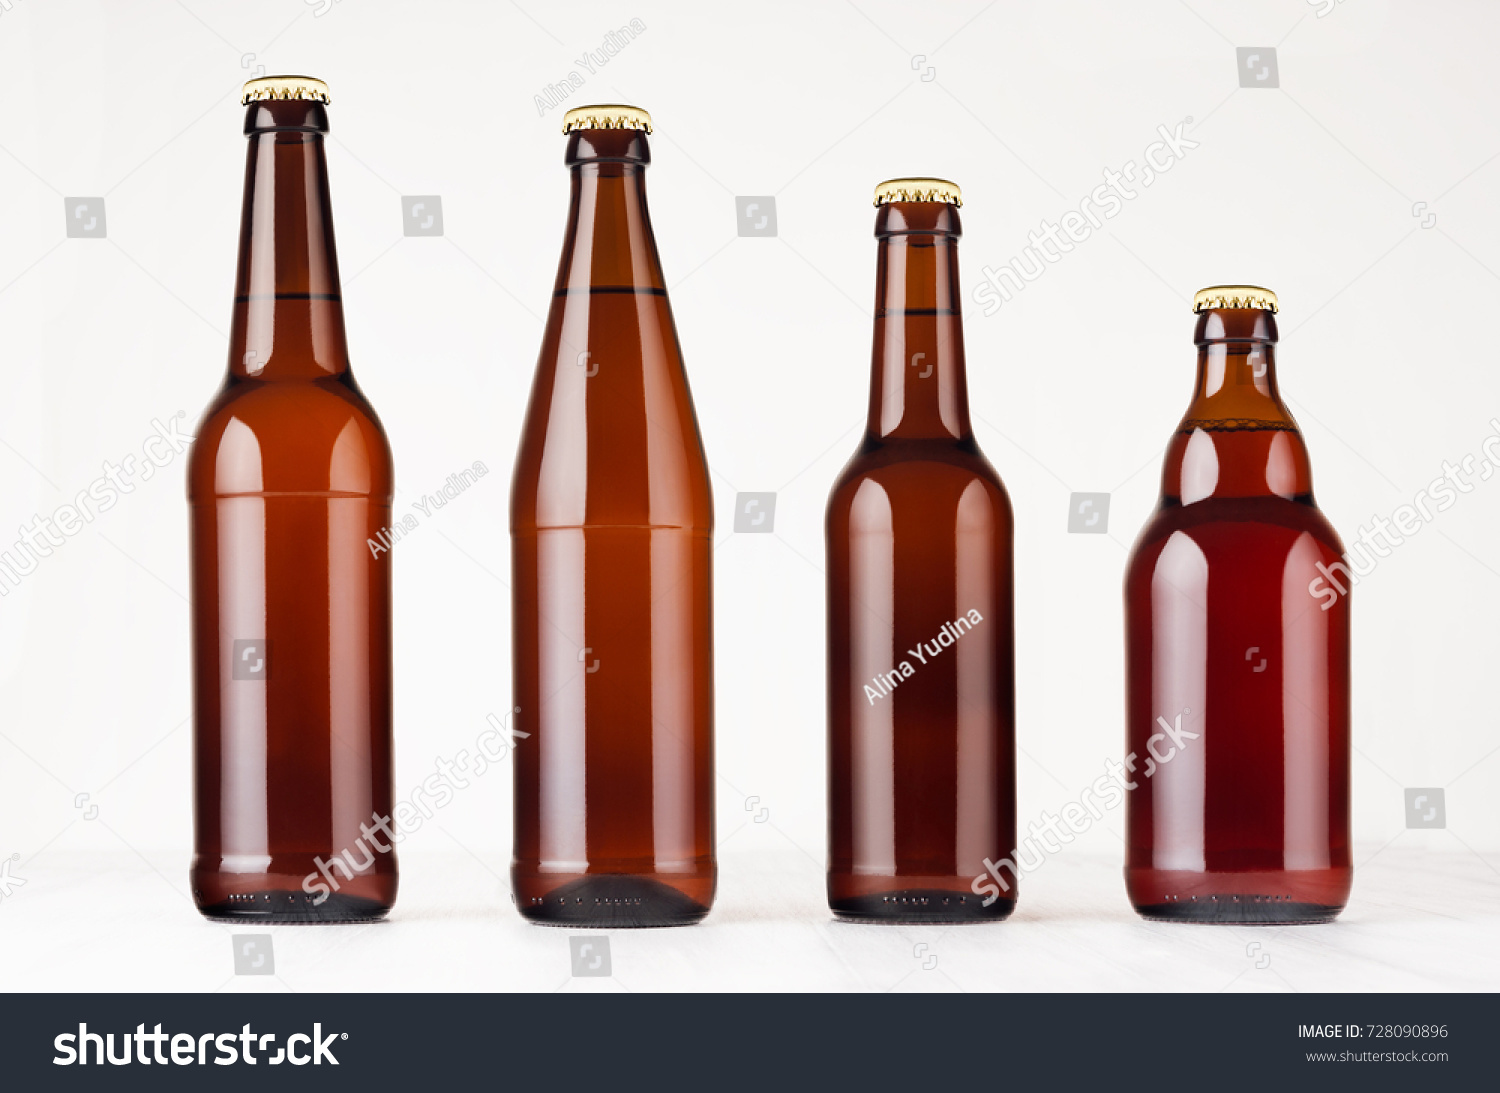 Collection different brown beer bottles, mockup. Template for advertising, design, branding identity on white wood table. #728090896